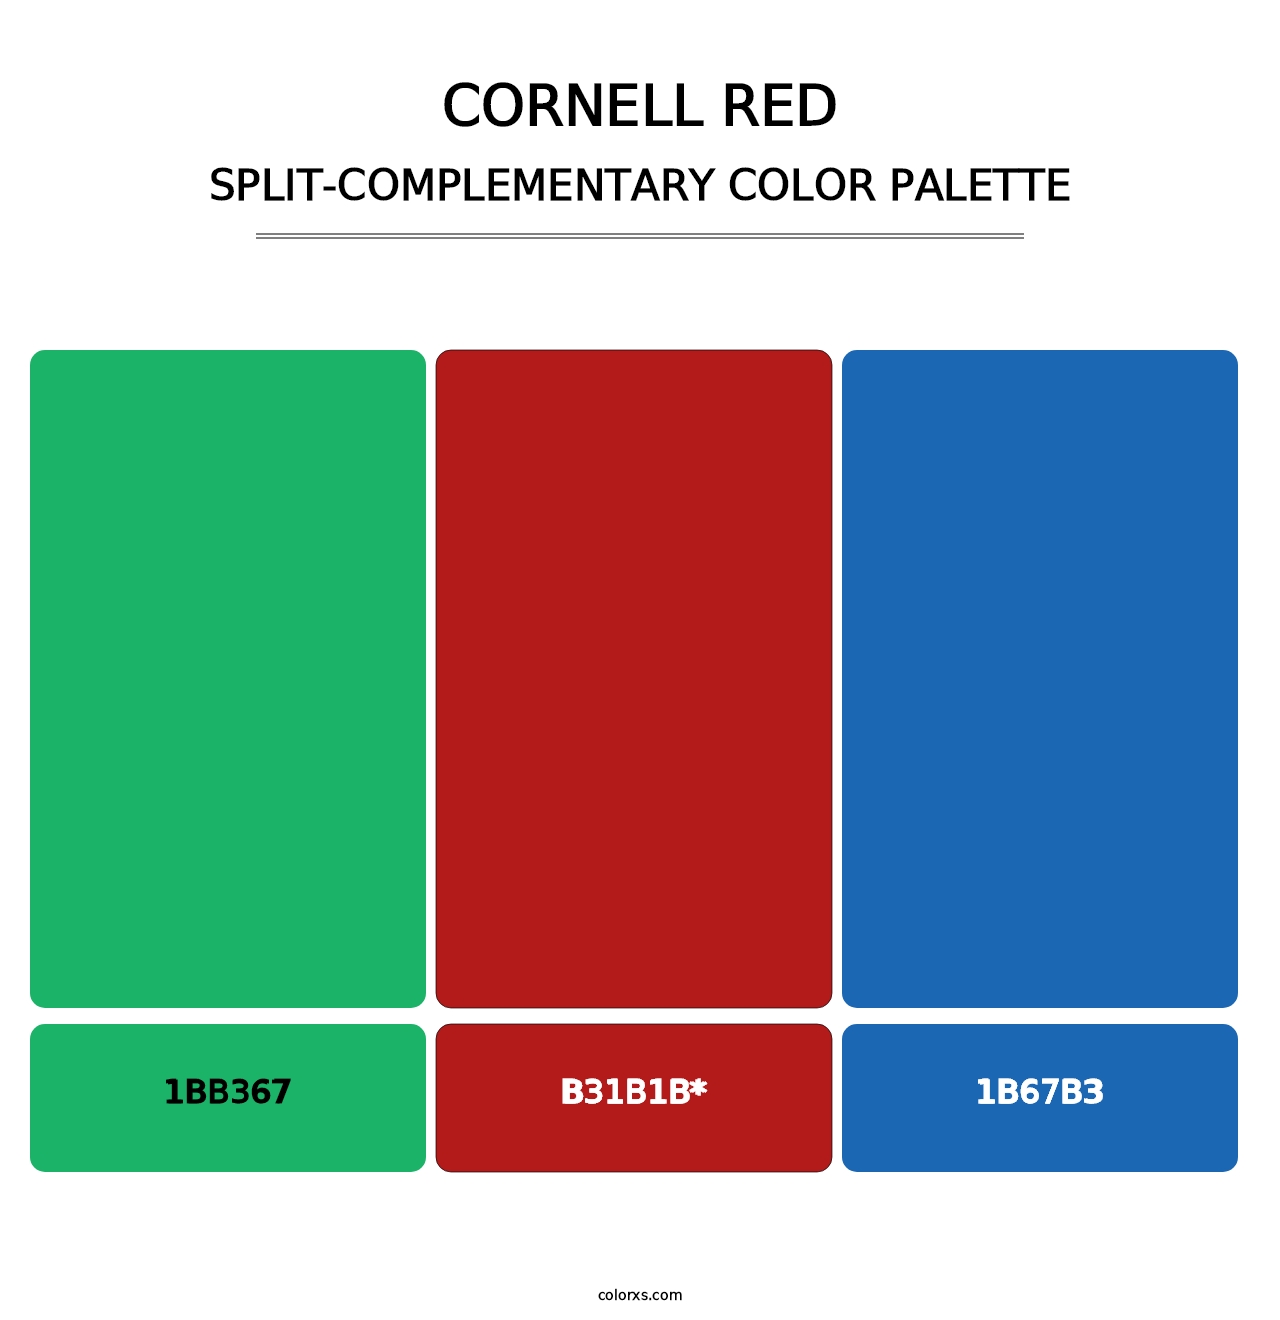 Cornell Red - Split-Complementary Color Palette